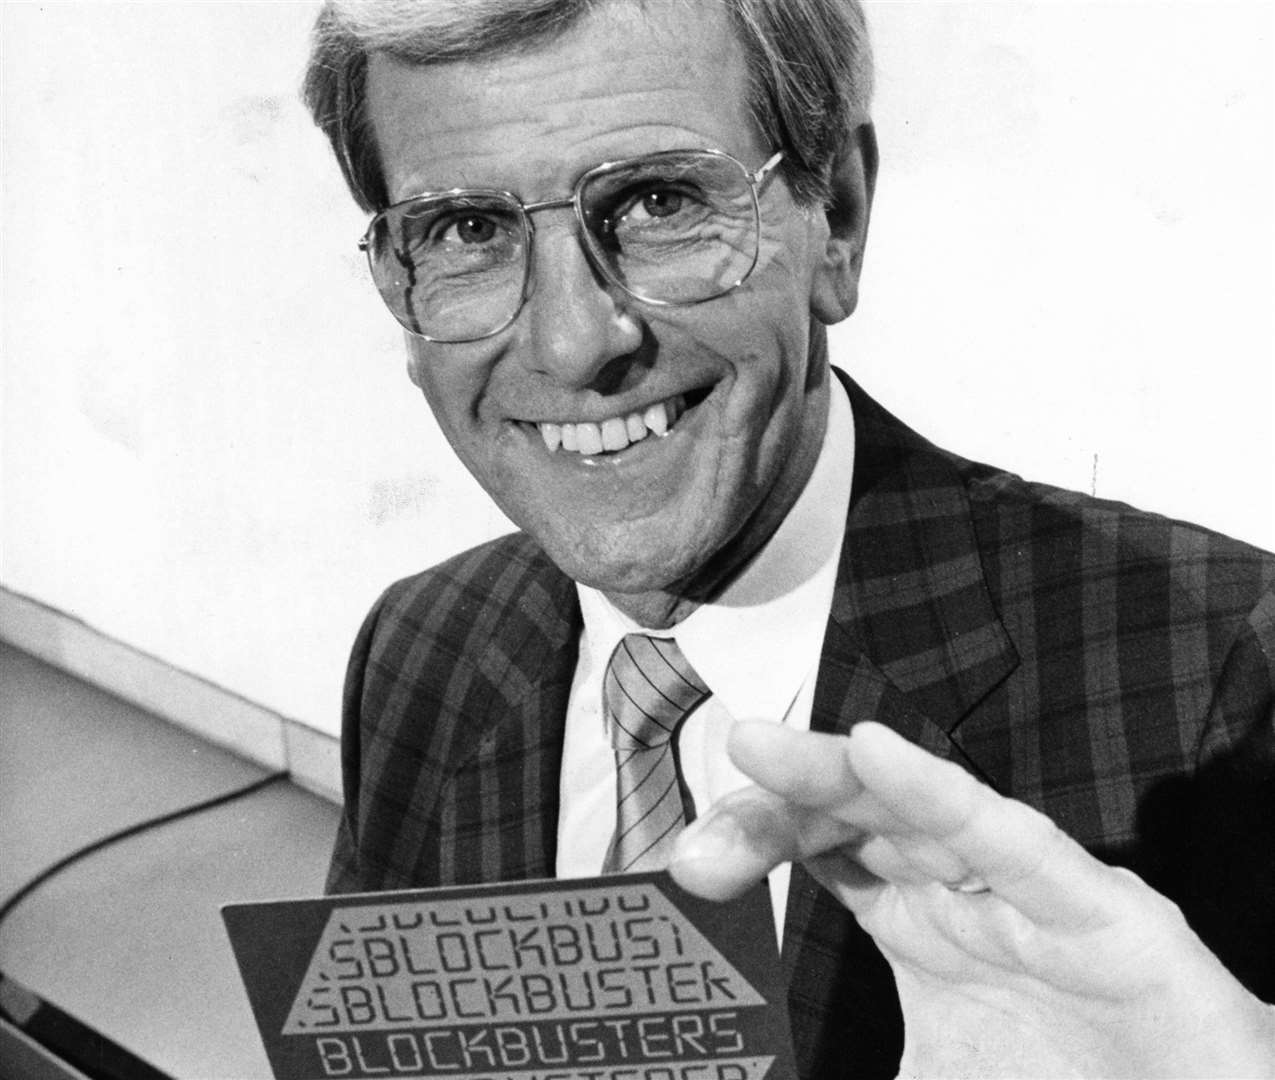 Bob Holness pictured during the fourth series in August 1986. Photo: Central Independent Television